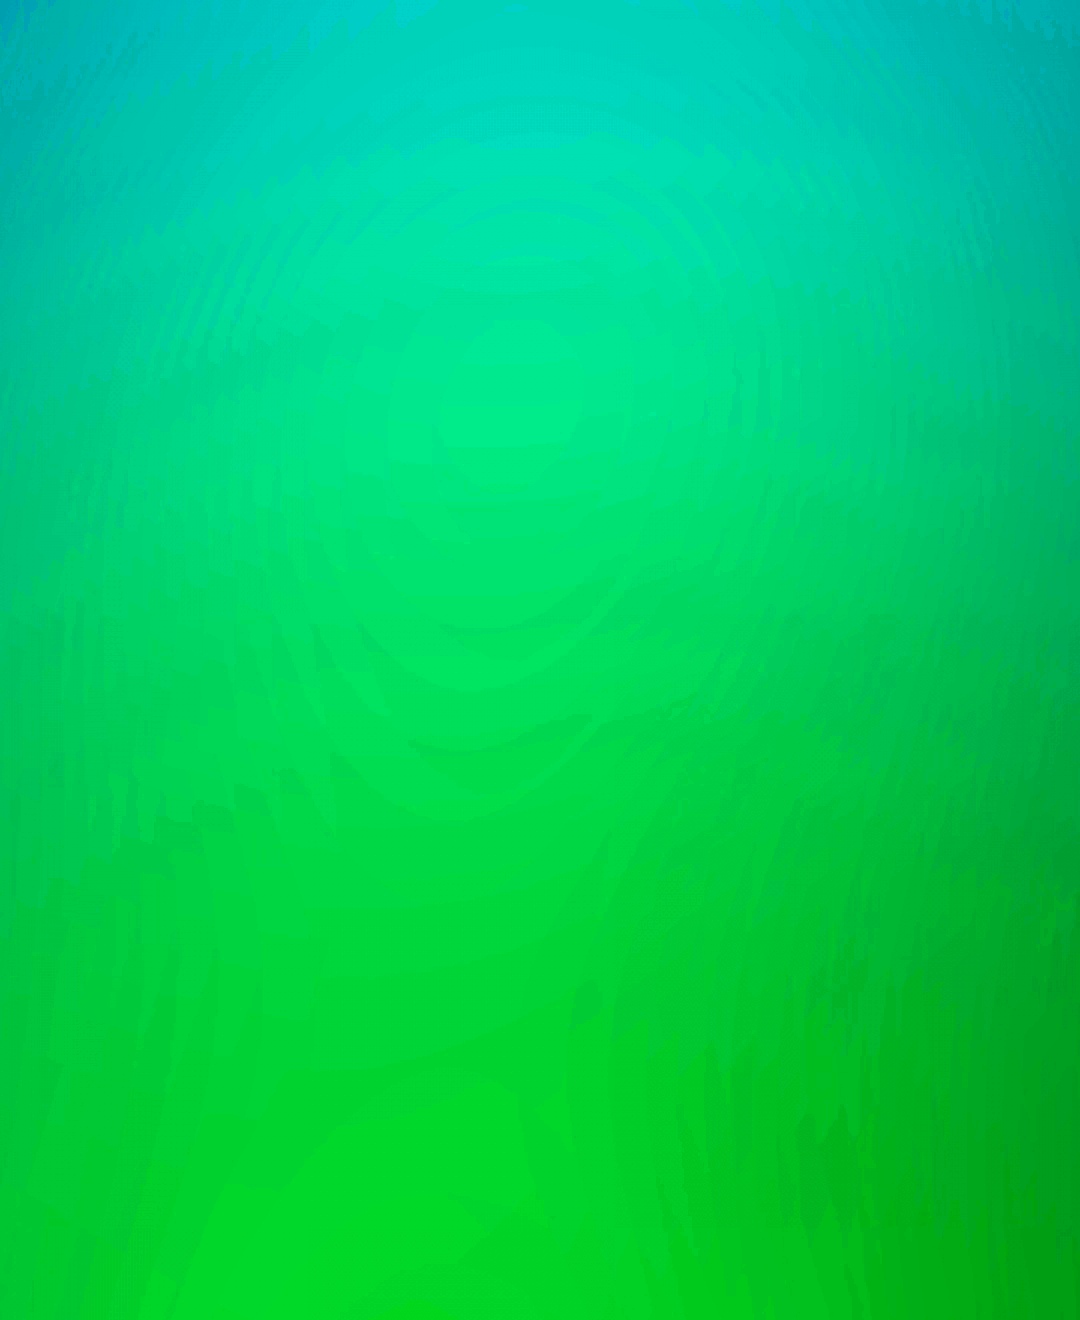 Abstract Mixture Of Blue And Green Wallpaper | Free Images at  -  vector clip art online, royalty free & public domain